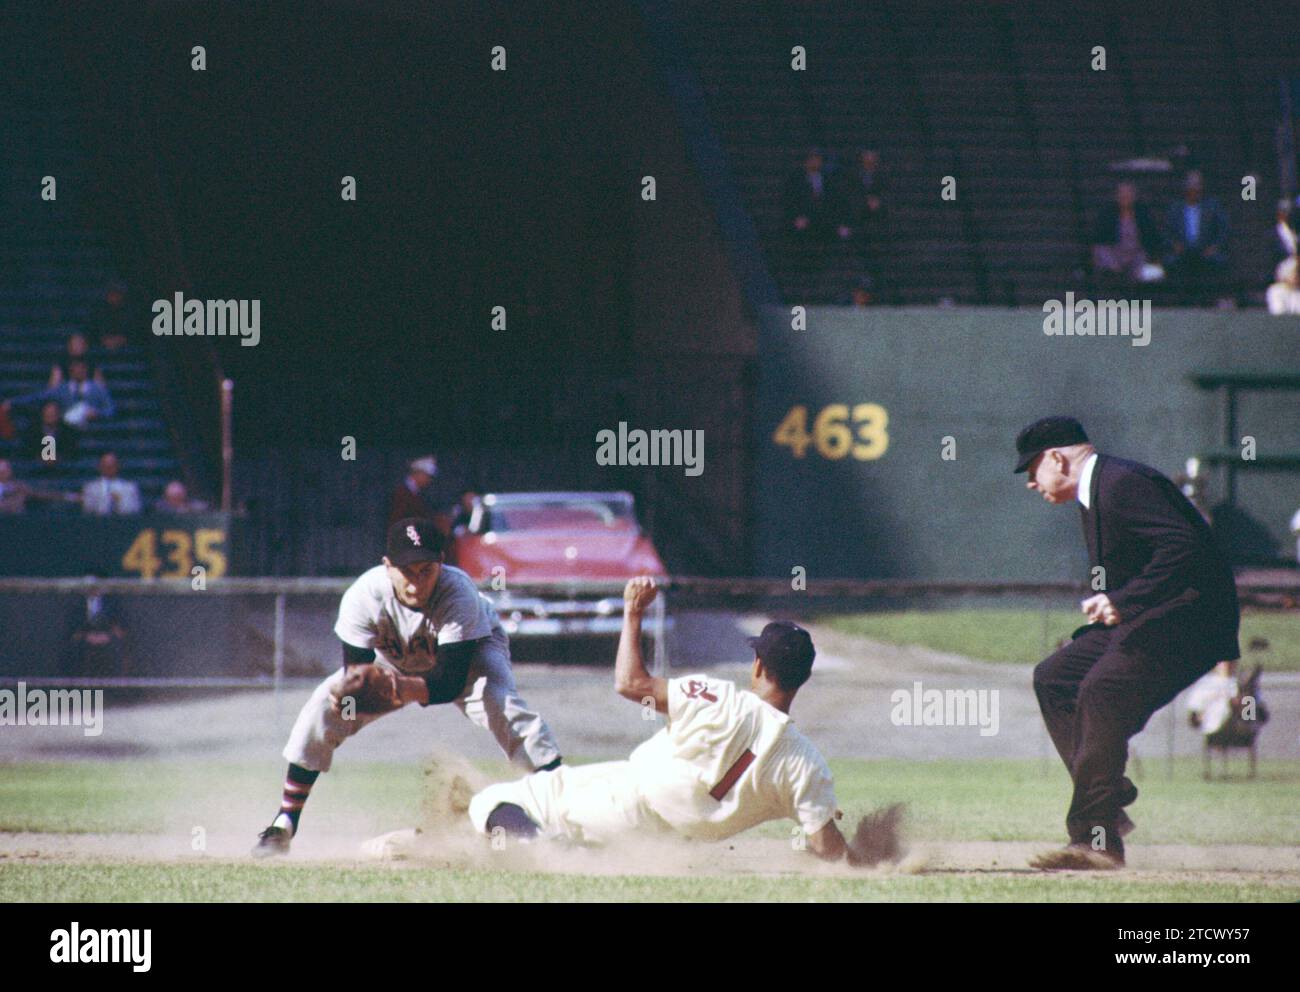 CLEVELAND, OH - MAY 26: Bobby Avila #1 of the Cleveland Indians is caught stealing as Jim Brideweser #3 of the Chicago White Sox puts the tag down as umpire Red Flaherty is there to make the call during an MLB game on May 26, 1955 at Cleveland Municipal Stadium in Cleveland, Ohio.  (Photo by Hy Peskin) *** Local Caption *** Bobby Avila;Jim Brideweser;Red Flaherty Stock Photo